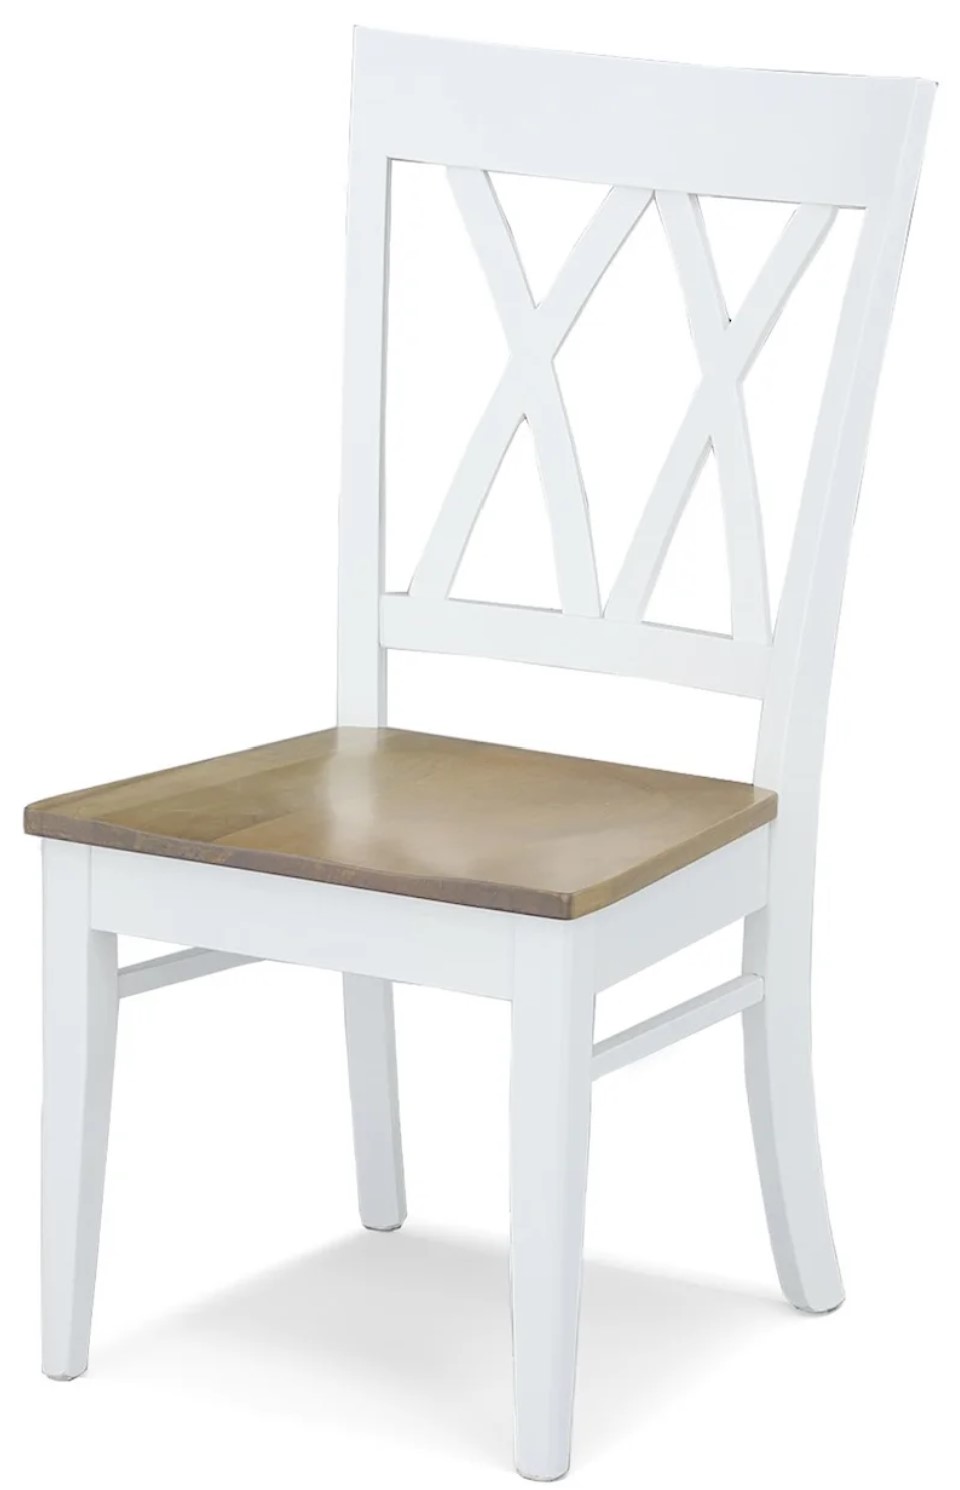 Springfield Maple Dining Chair